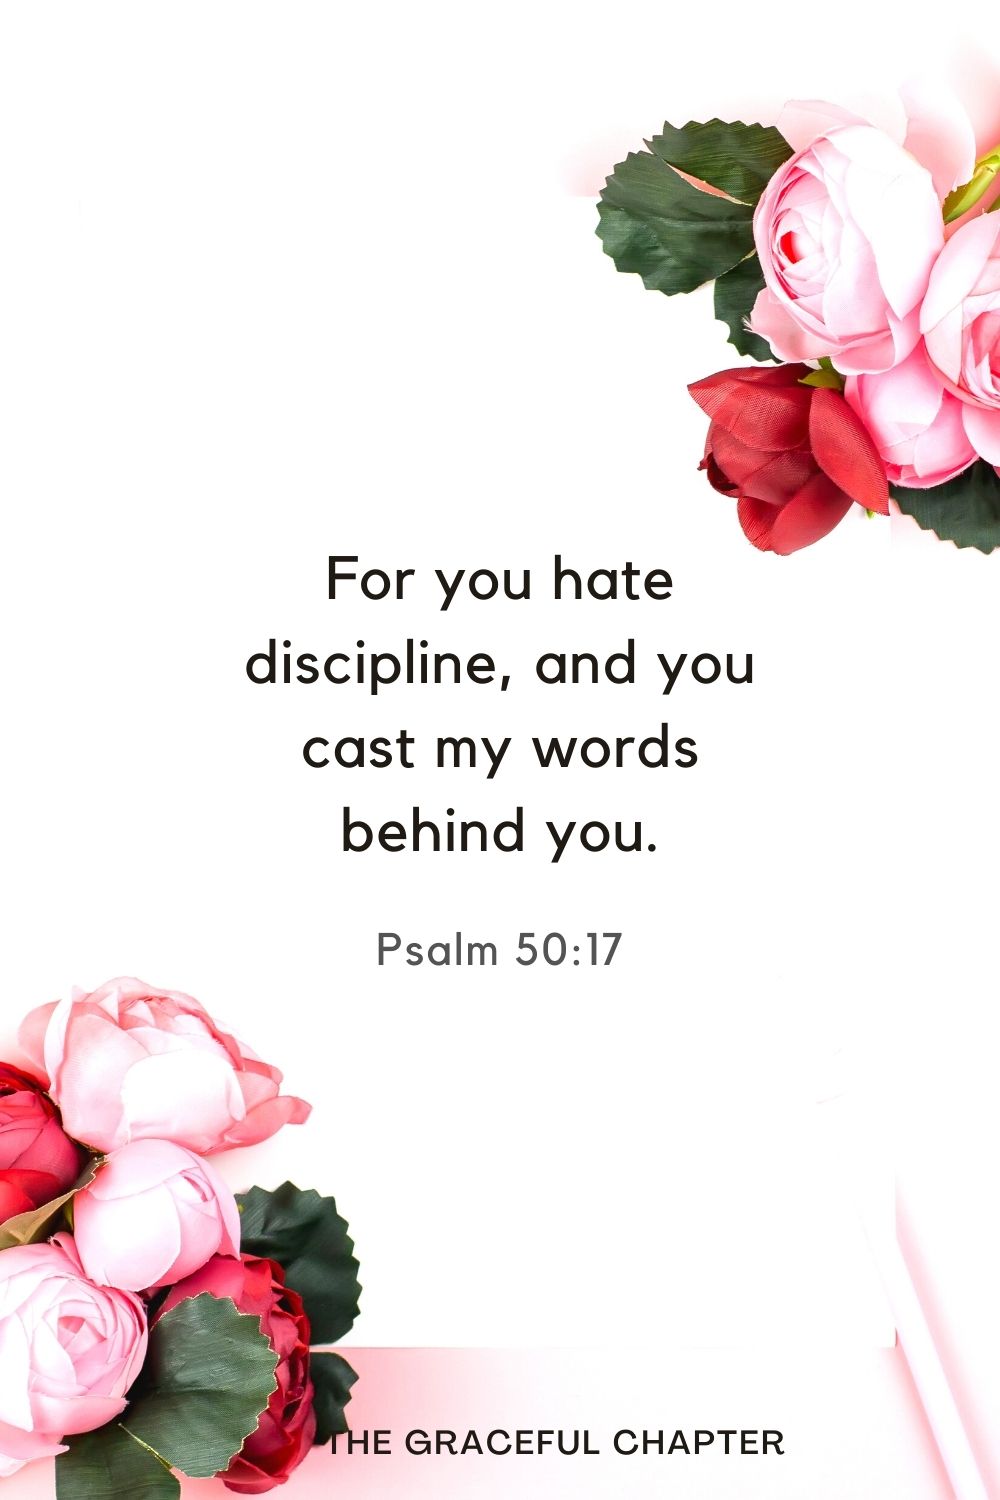 For you hate discipline, and you cast my words behind you. Psalm 50:17